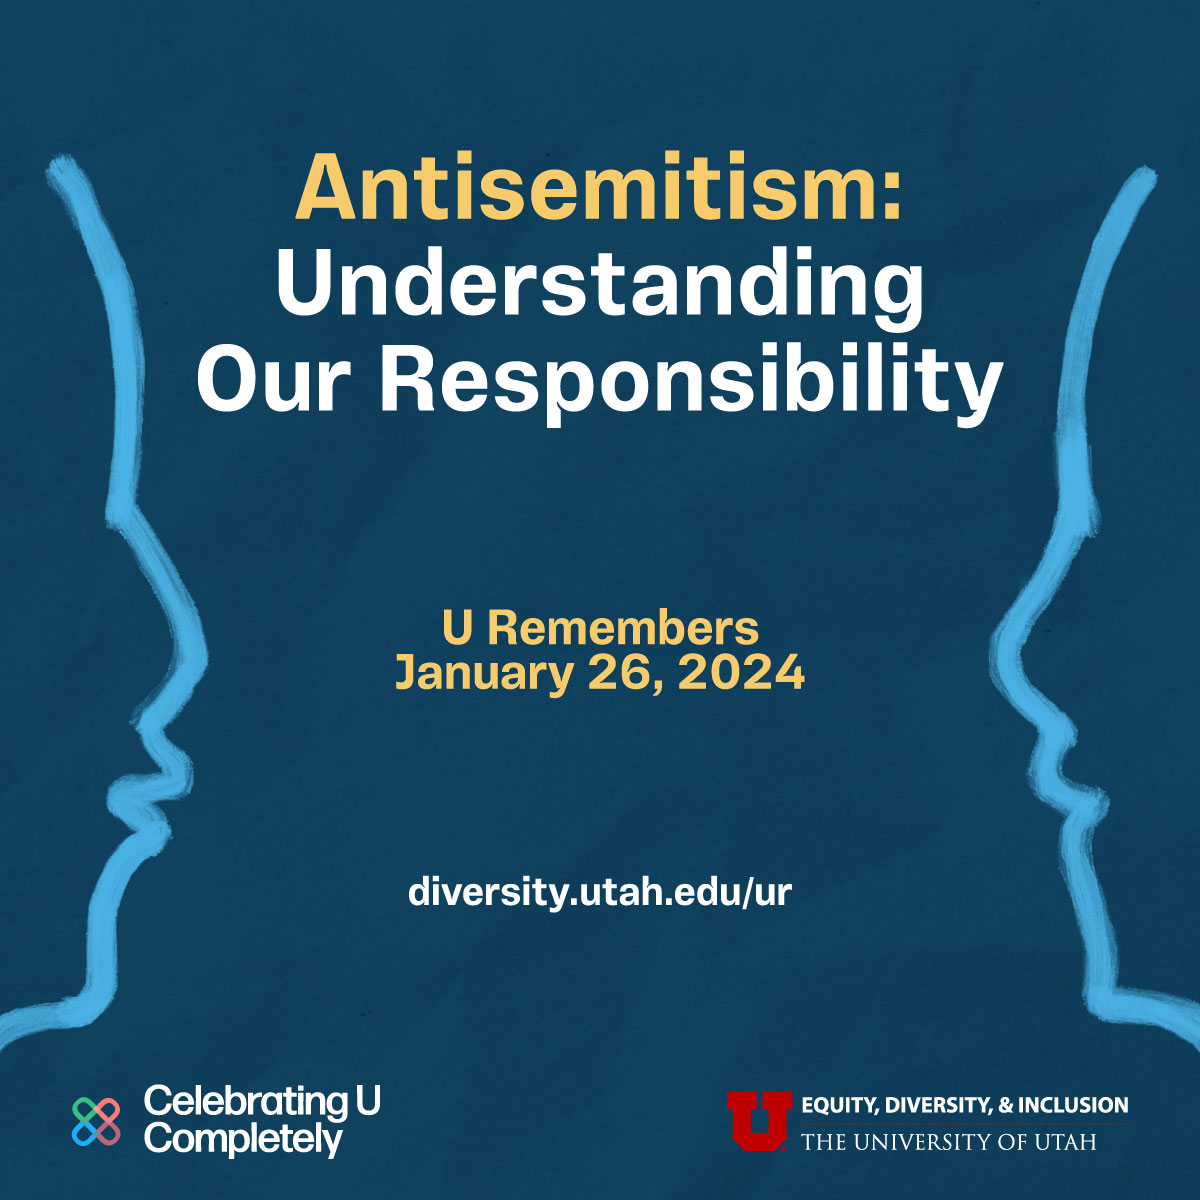 Antisemitism: Understanding Our Responsibility, U Remembers, January 26, 2024